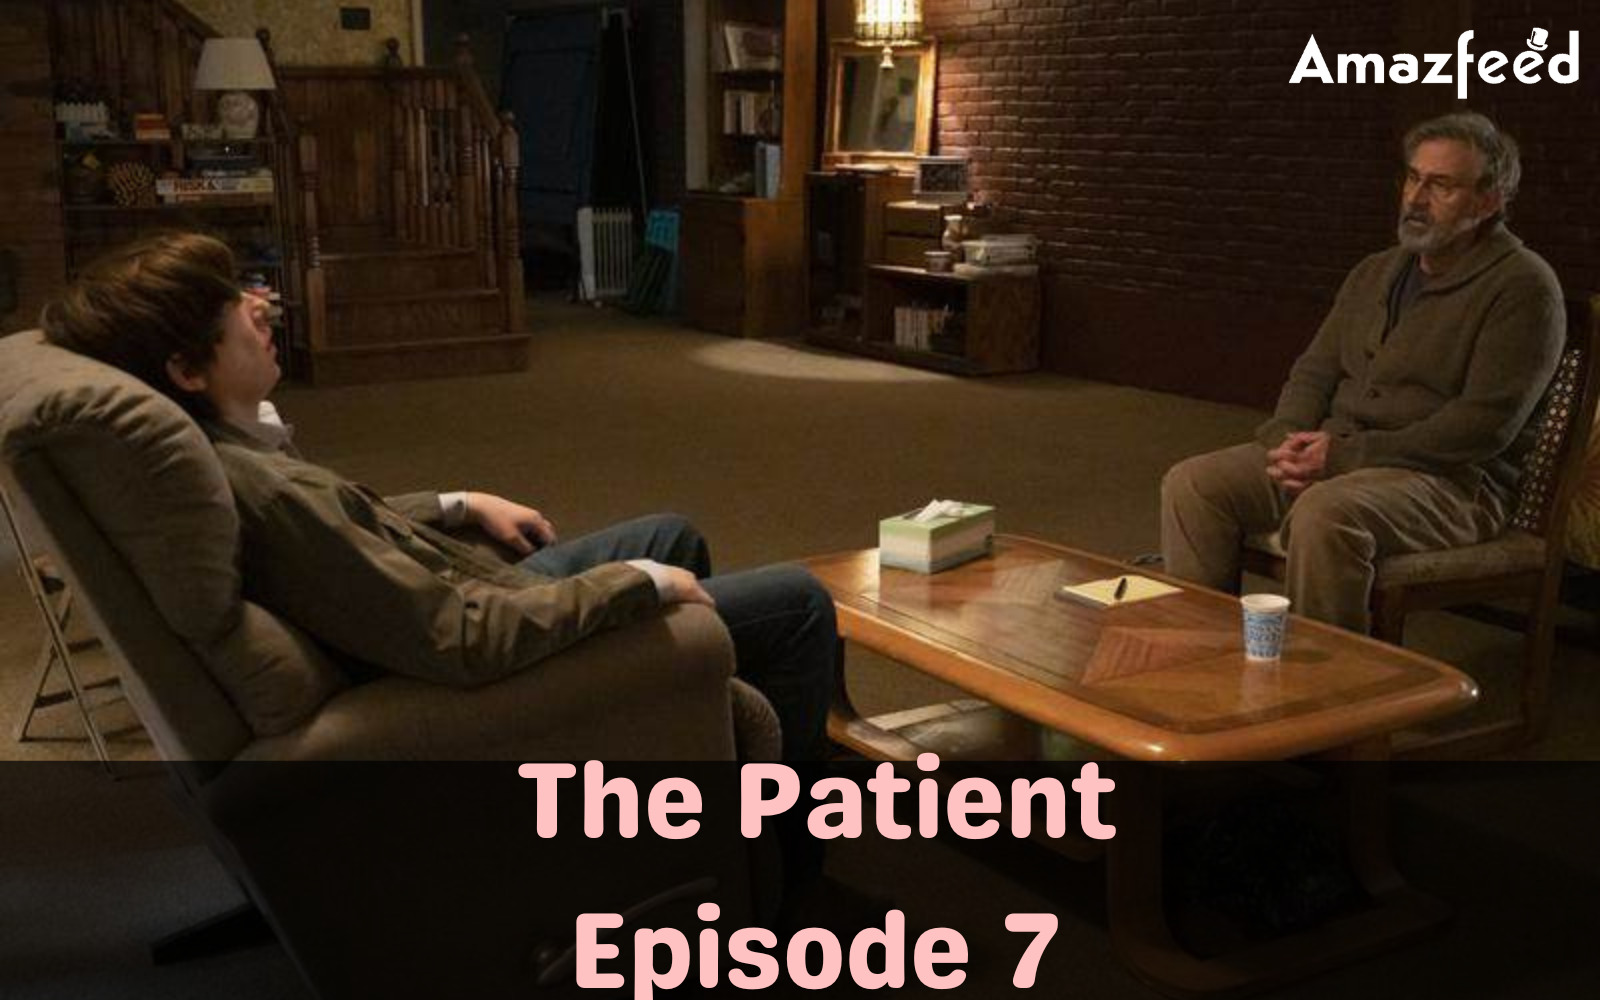 The Patient Episode 7 release date